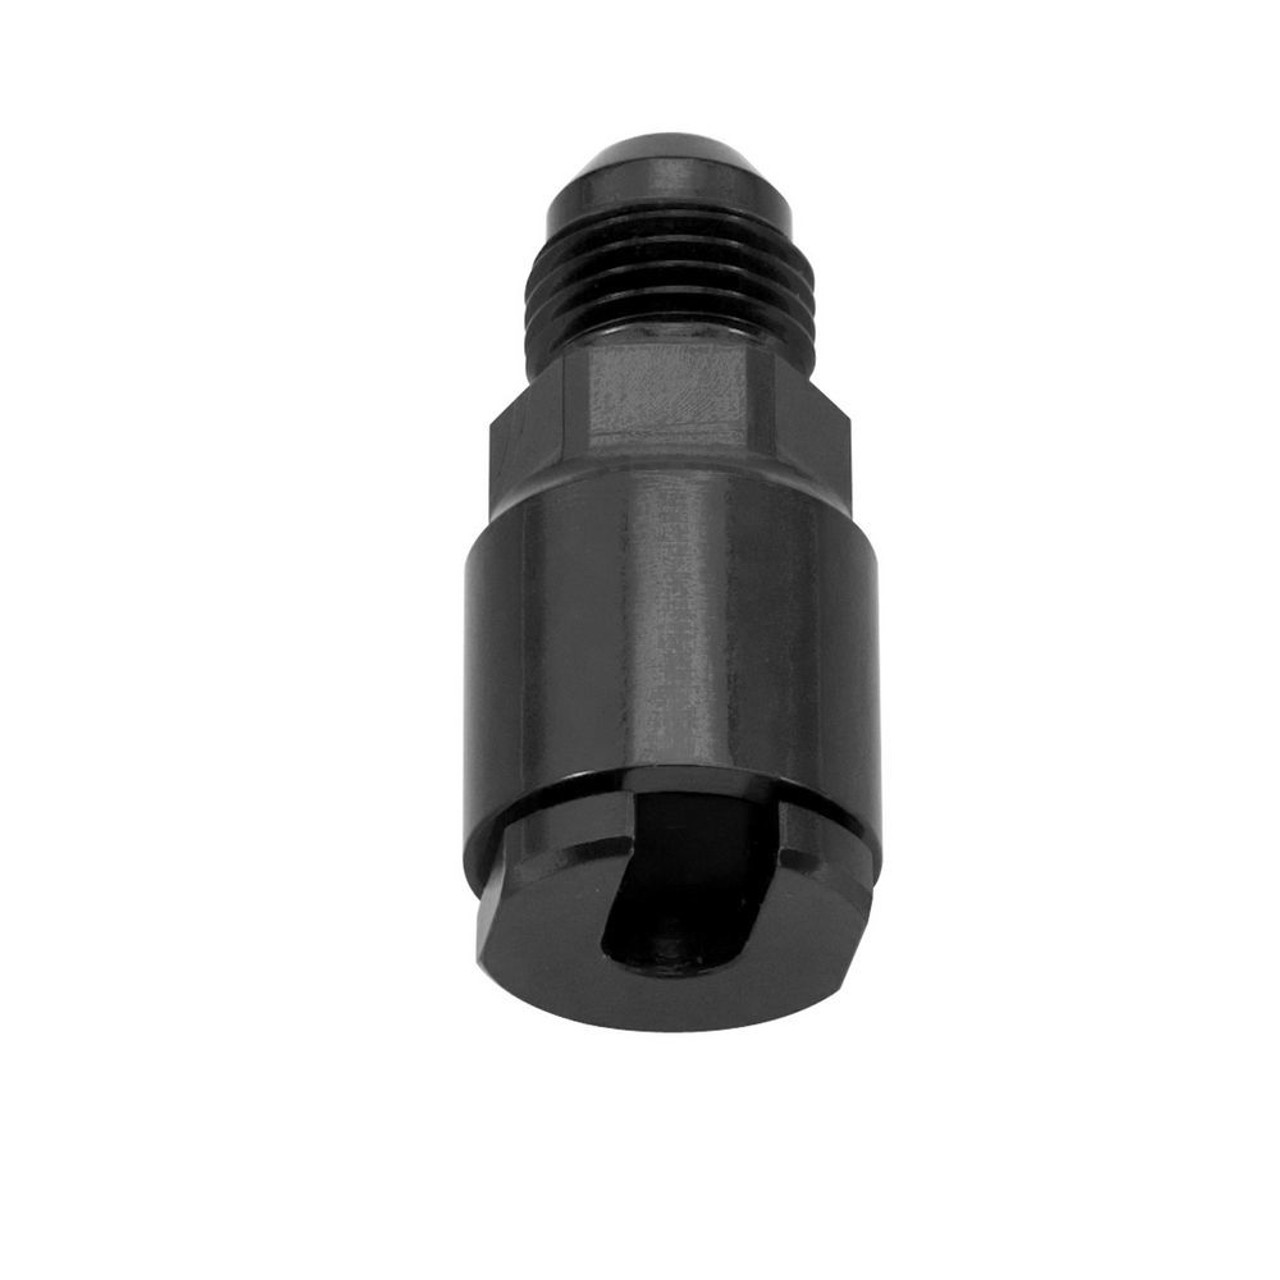 EFI Fuel Fitting 6an Male to 1/4 Female Black RUS641303